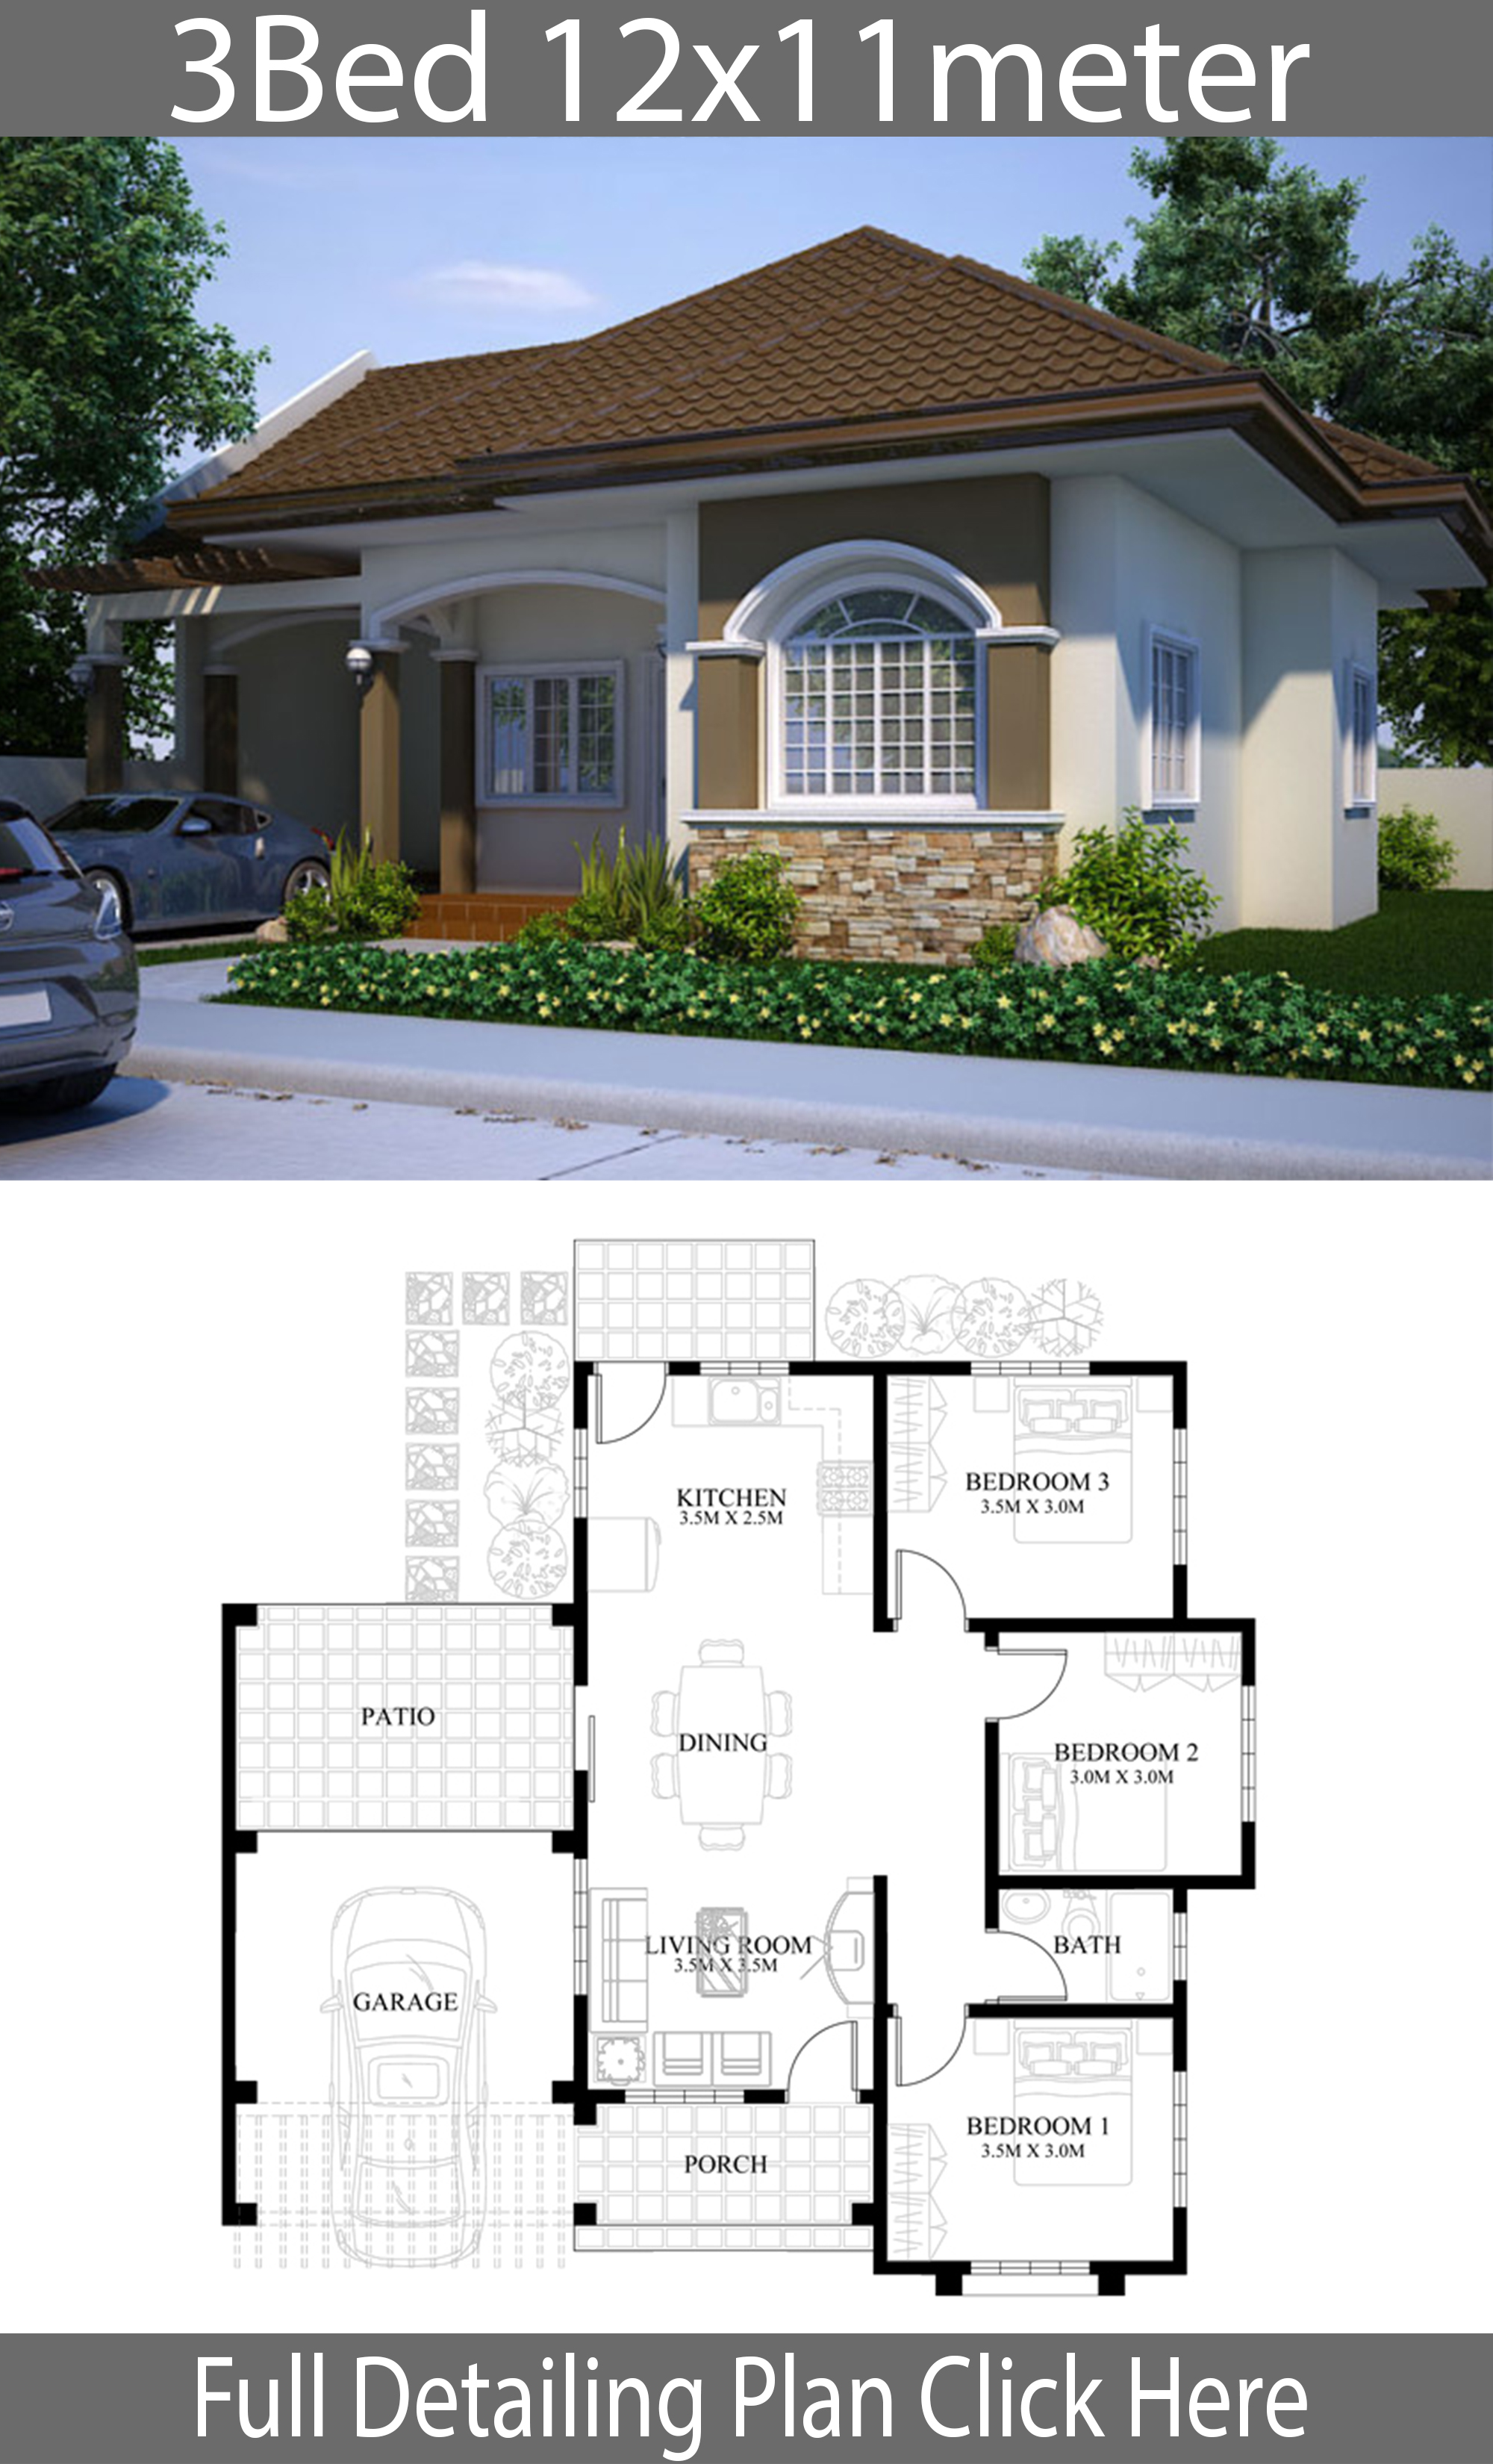 3 bedroom small house design